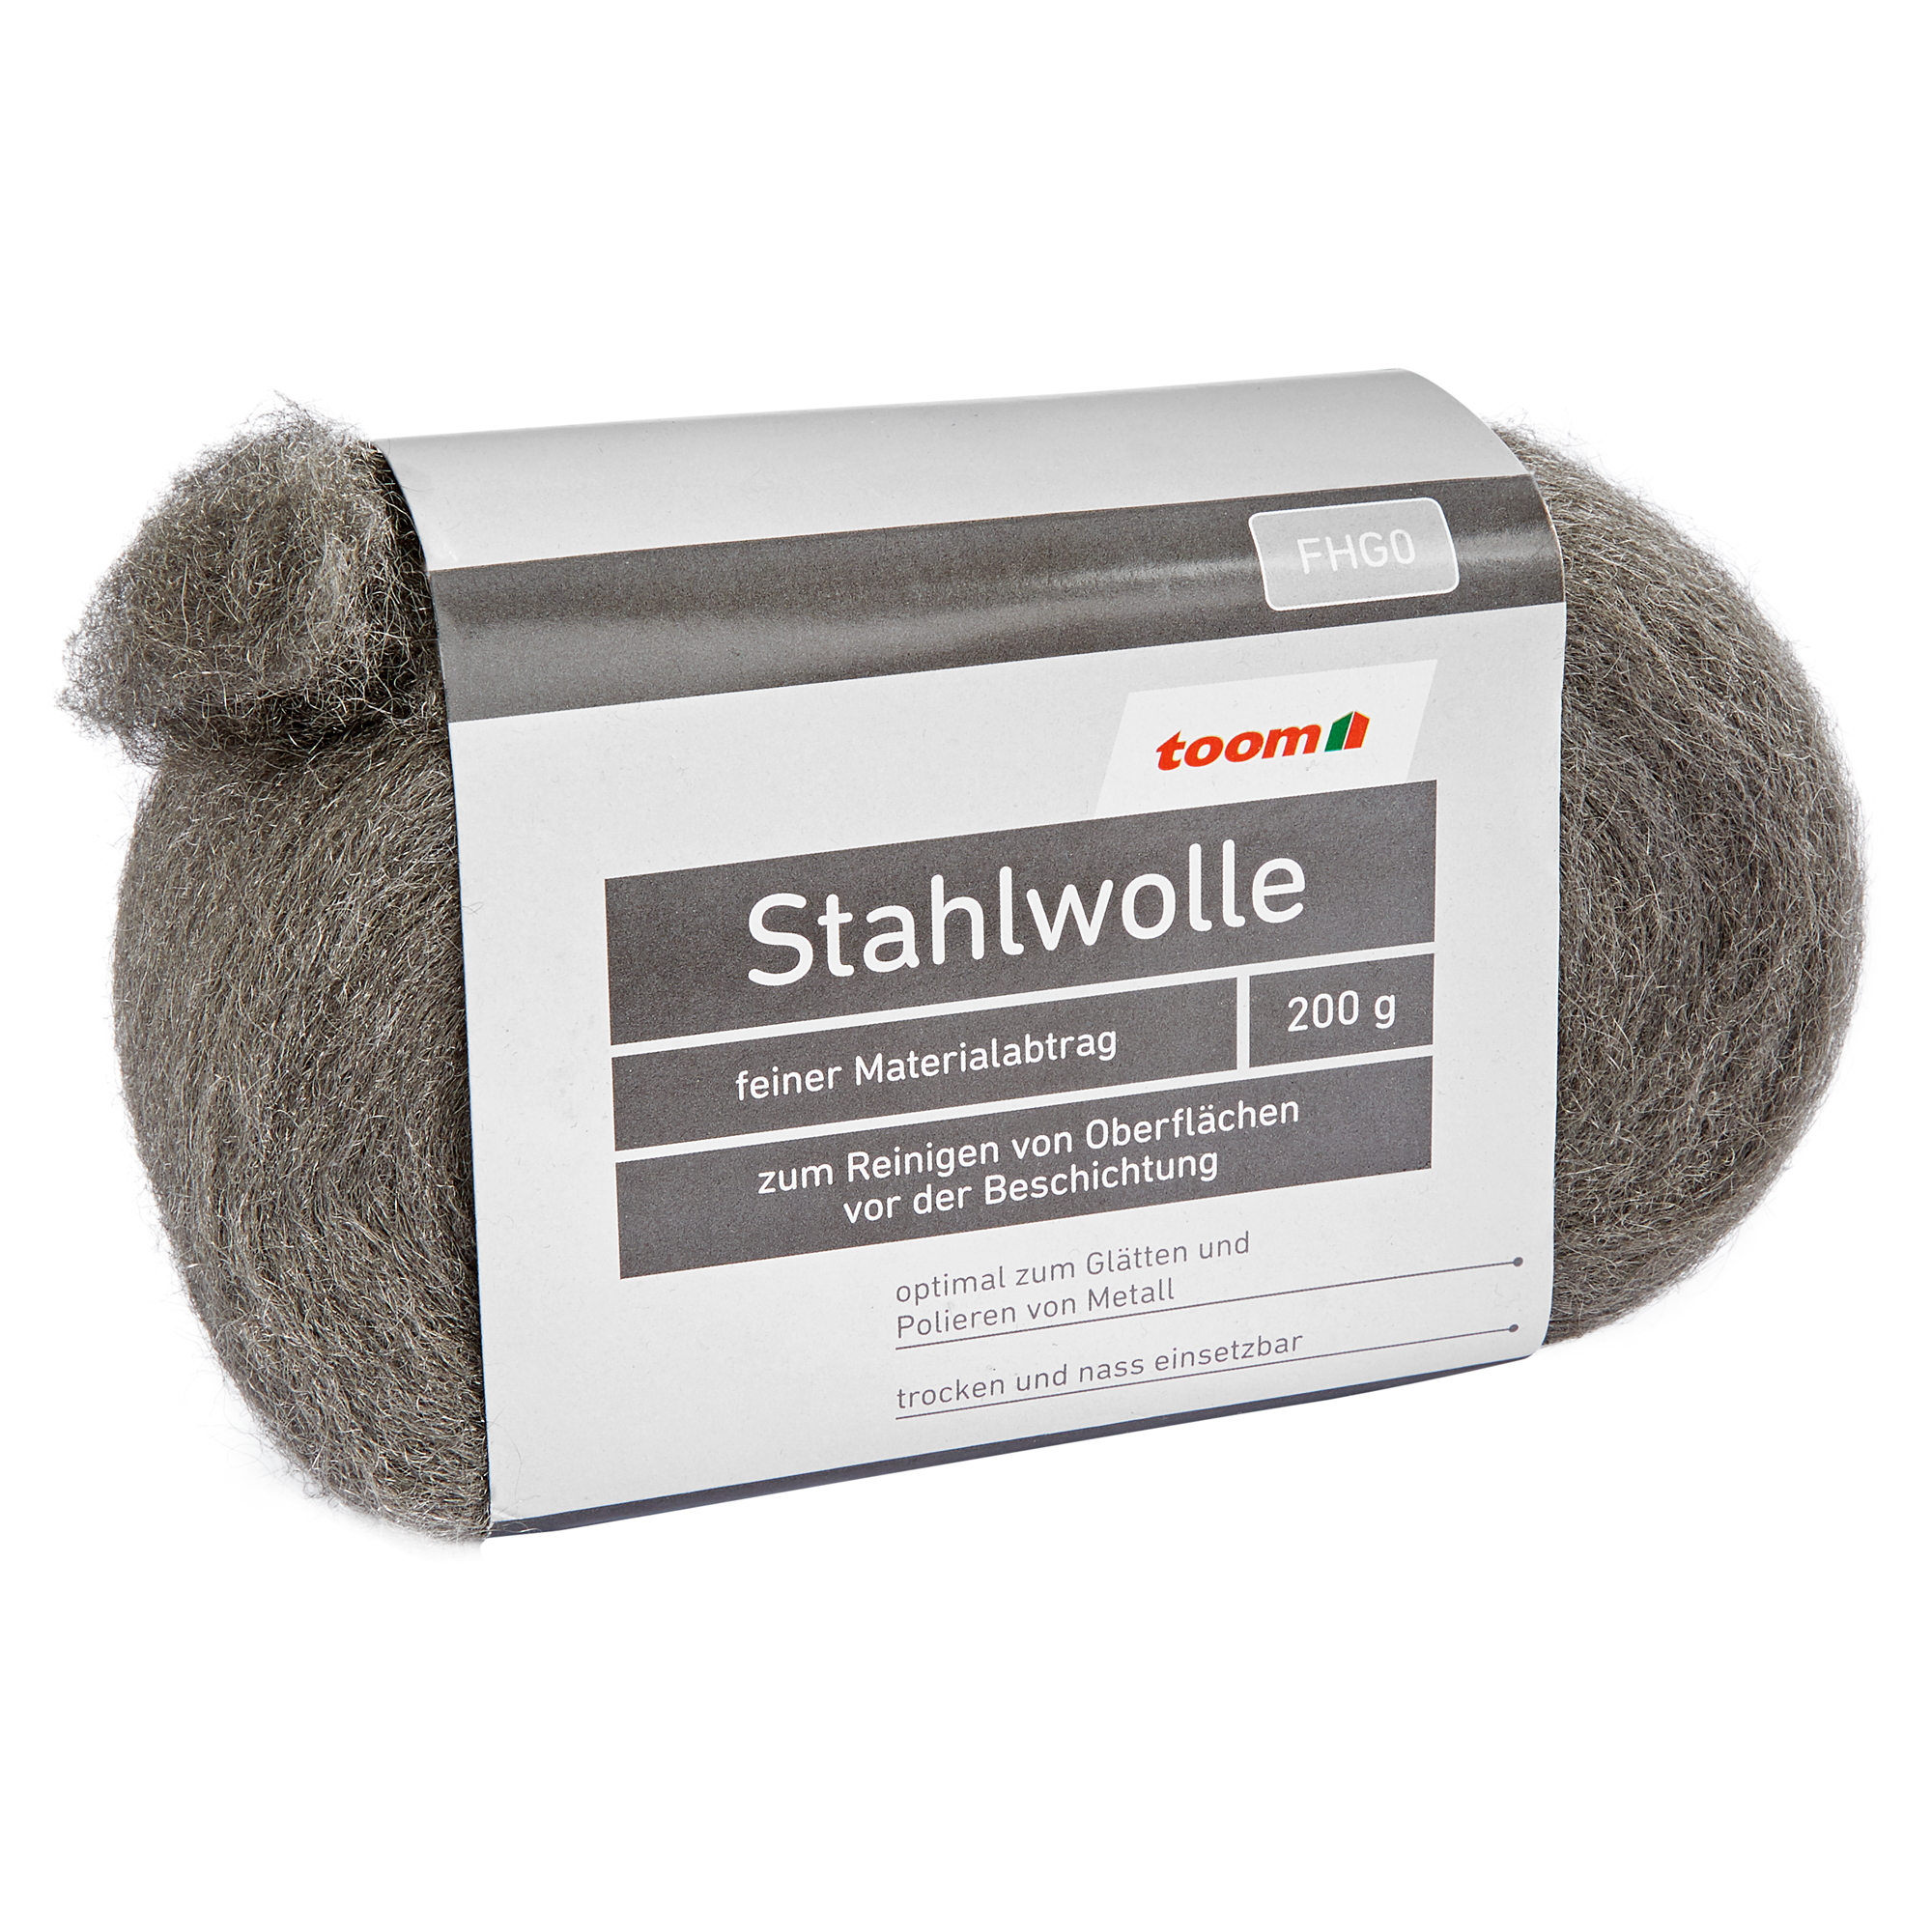 Stahlwolle 200 g + product picture